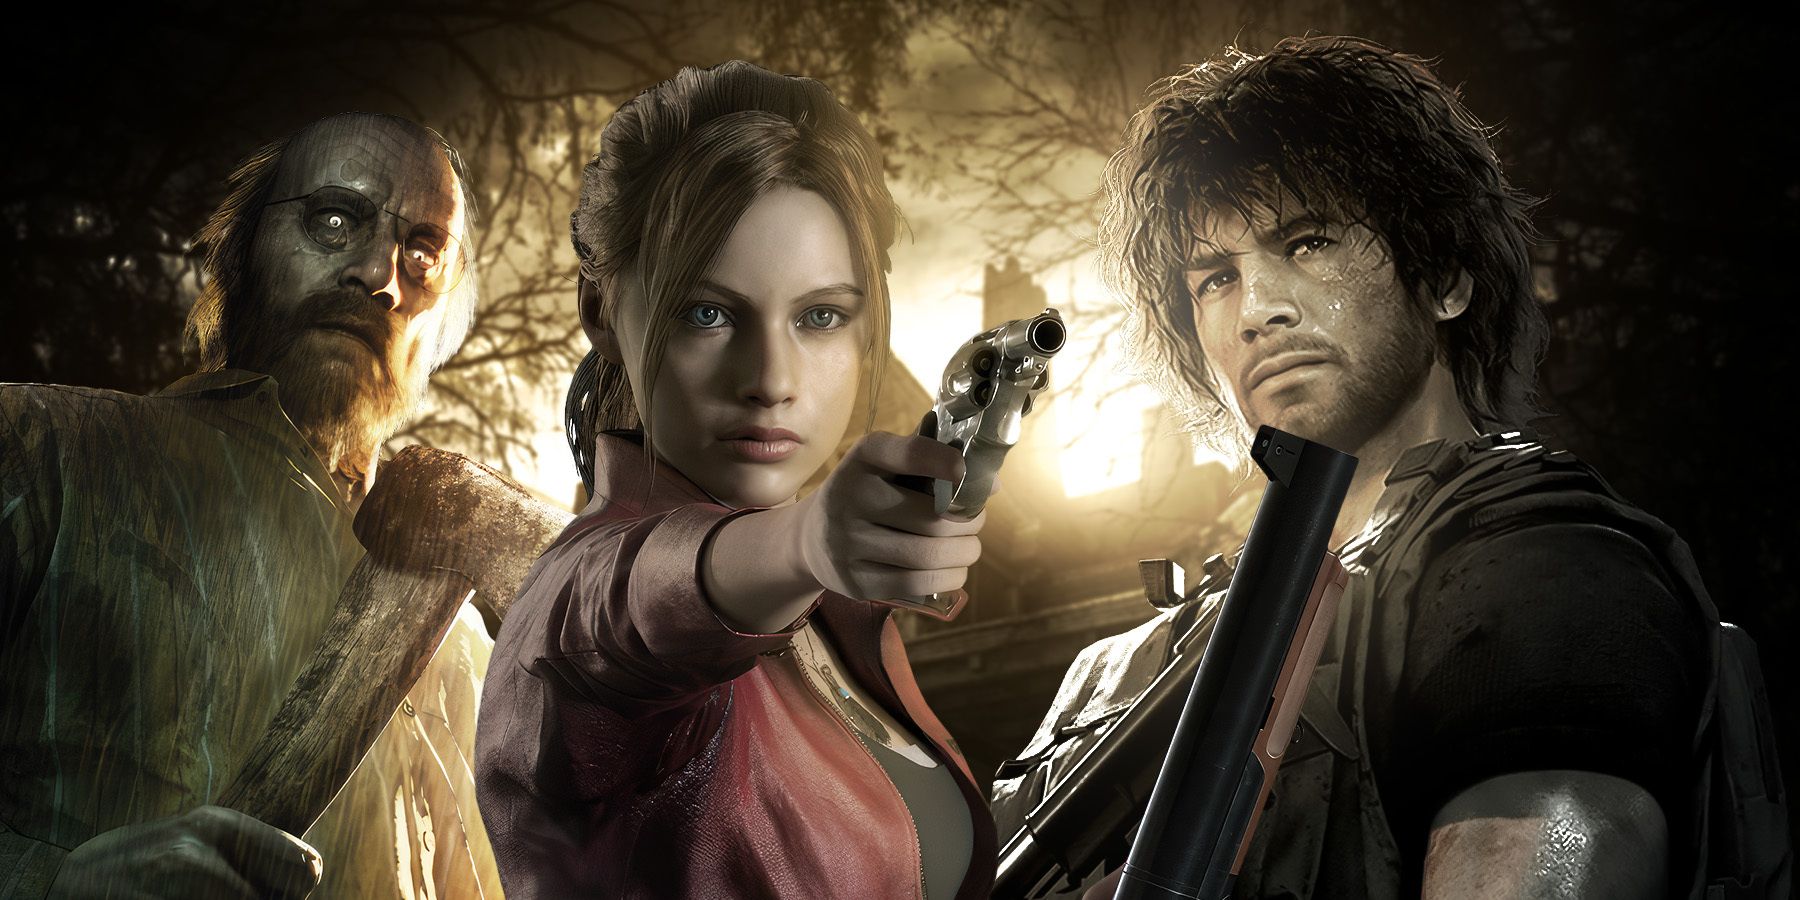 The 10 Best Resident Evil Games of All Time